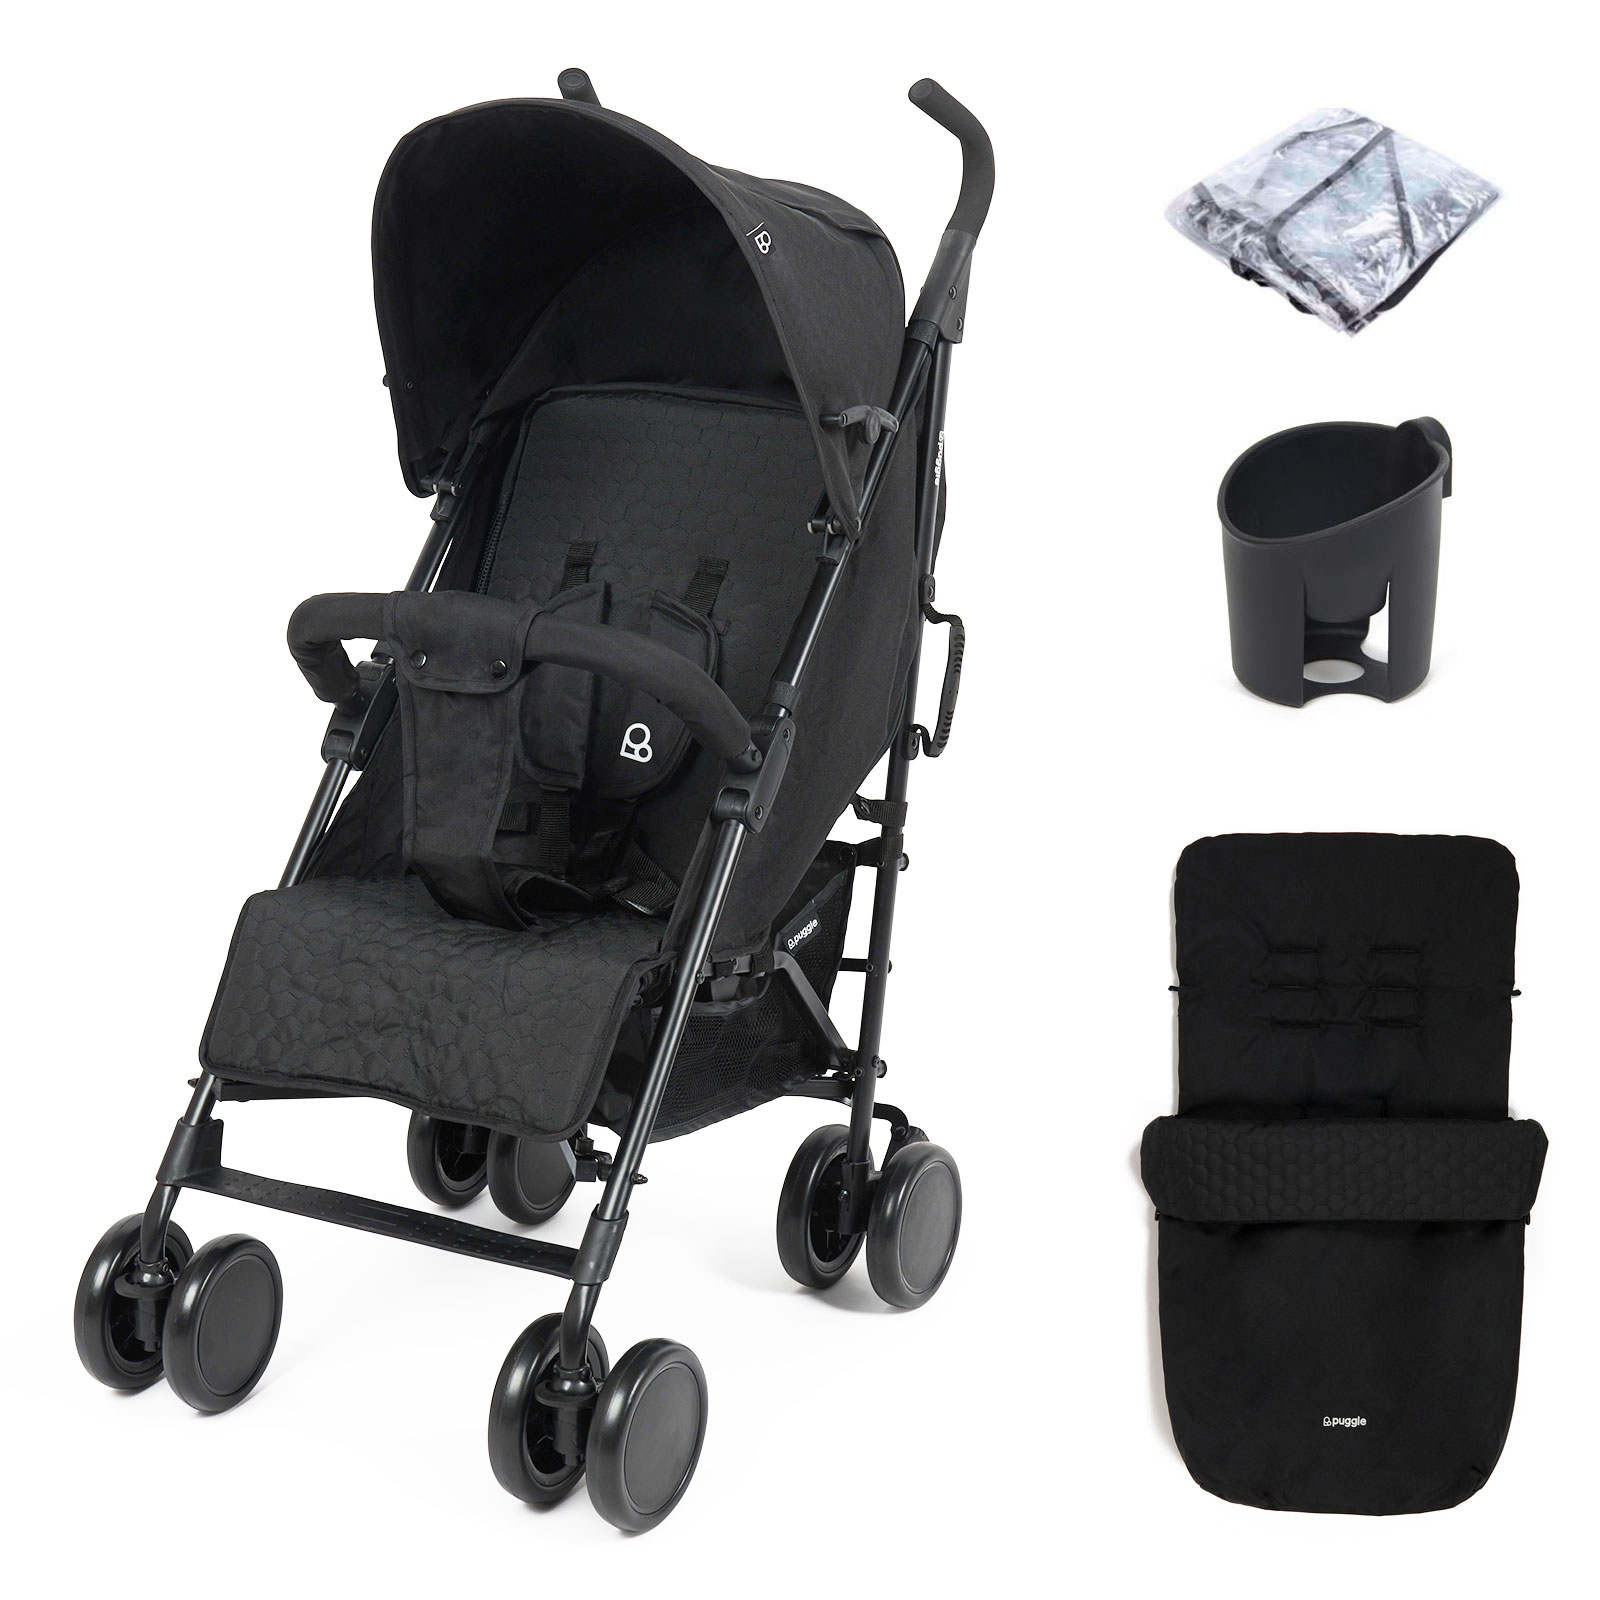 Puggle Litemax Pushchair Stroller with Raincover, Cupholder and Universal Footmuff - Storm Black